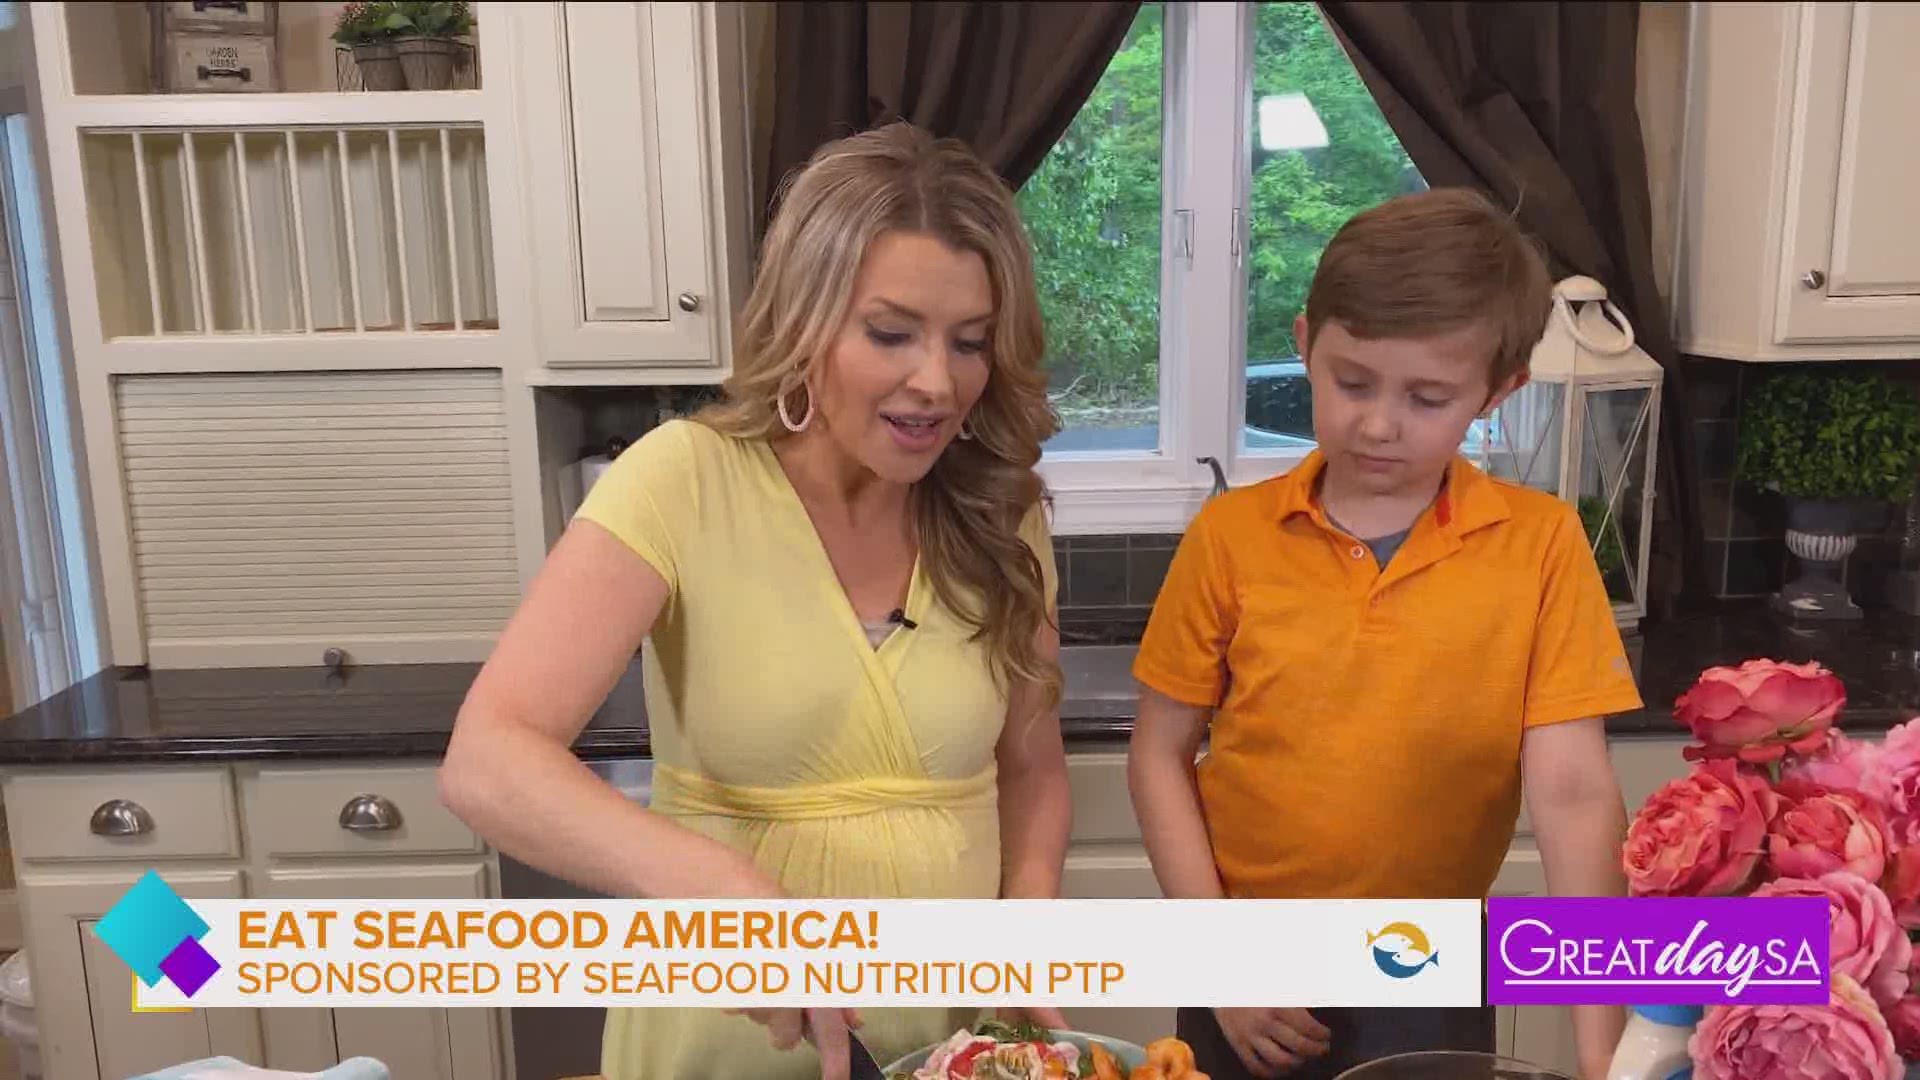 Annessa Chumbley shares tips about how to incorporate seafood into your everyday diet, while cooking at home.